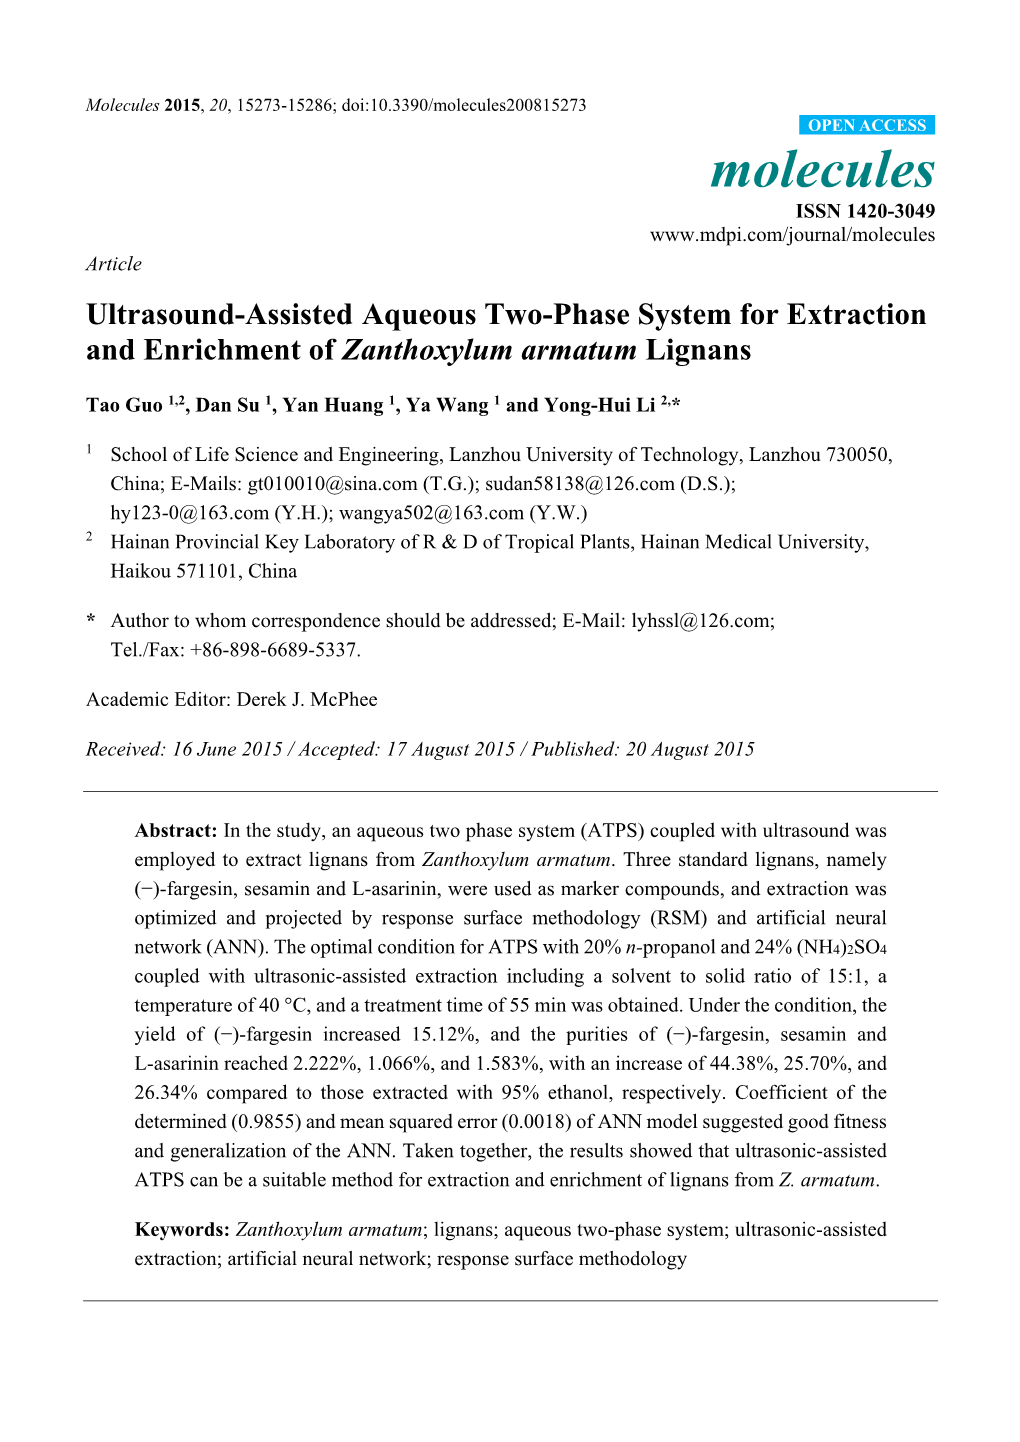 Ultrasound-Assisted Aqueous Two-Phase System for Extraction and Enrichment of Zanthoxylum Armatum Lignans